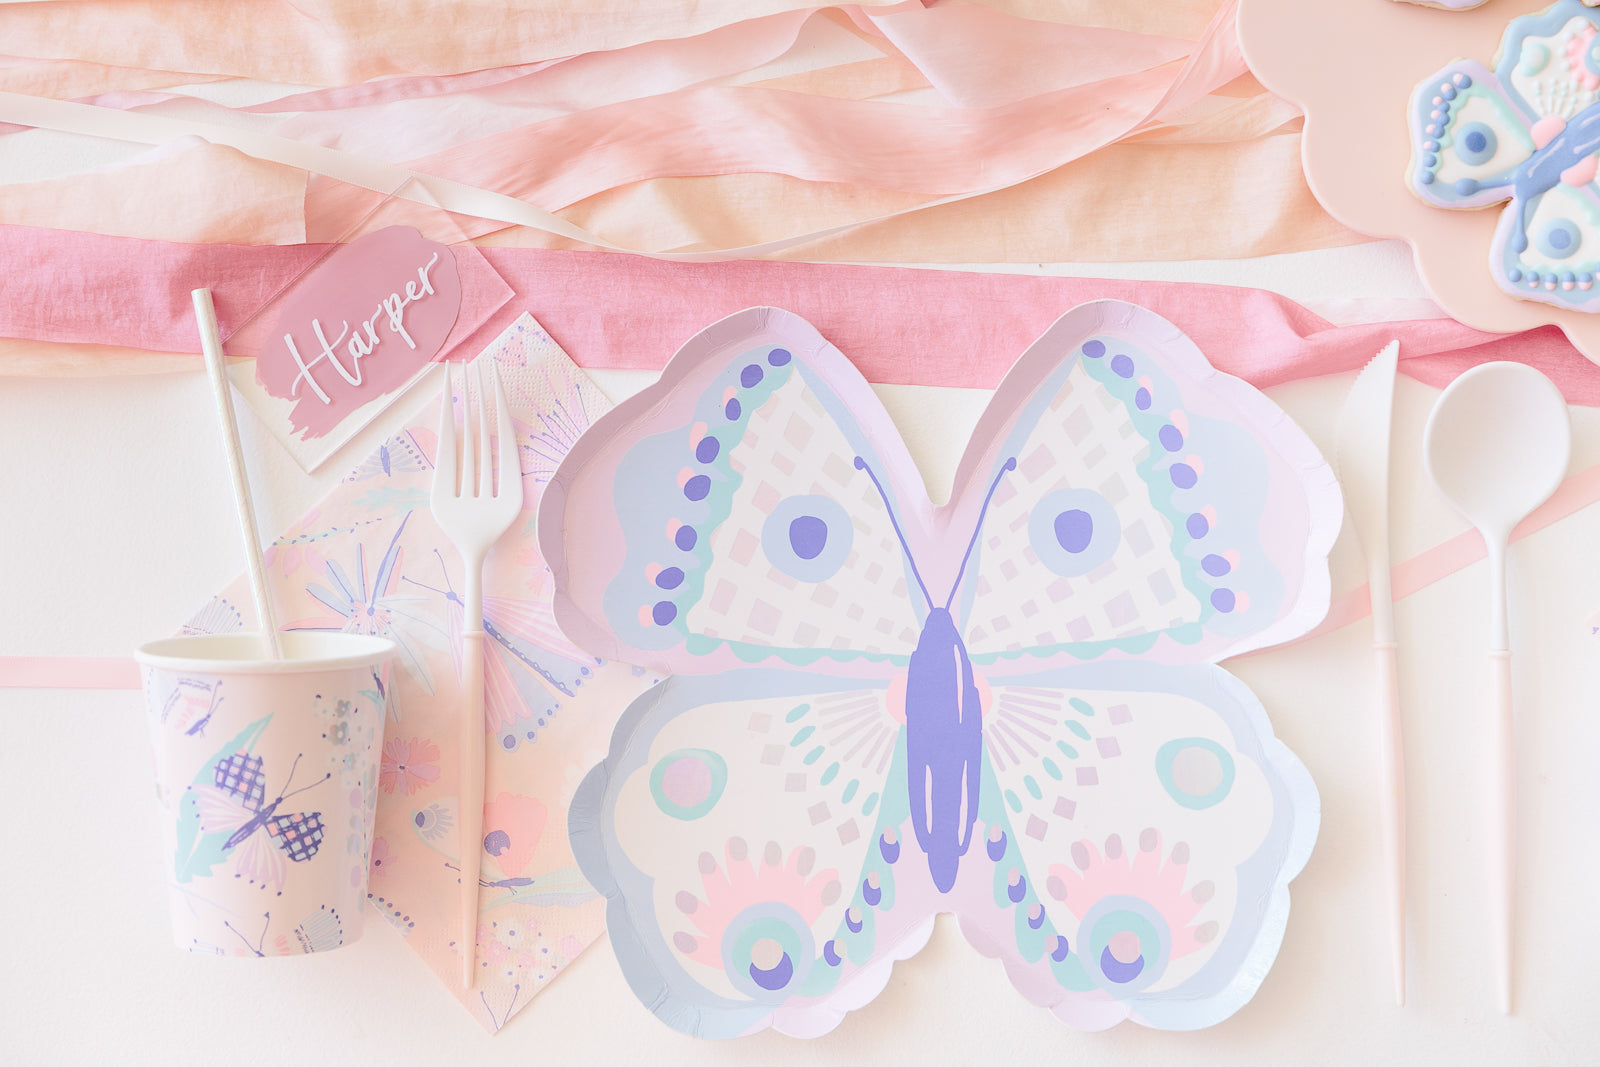 Butterfly party supplies set out for a girl's birthday party.